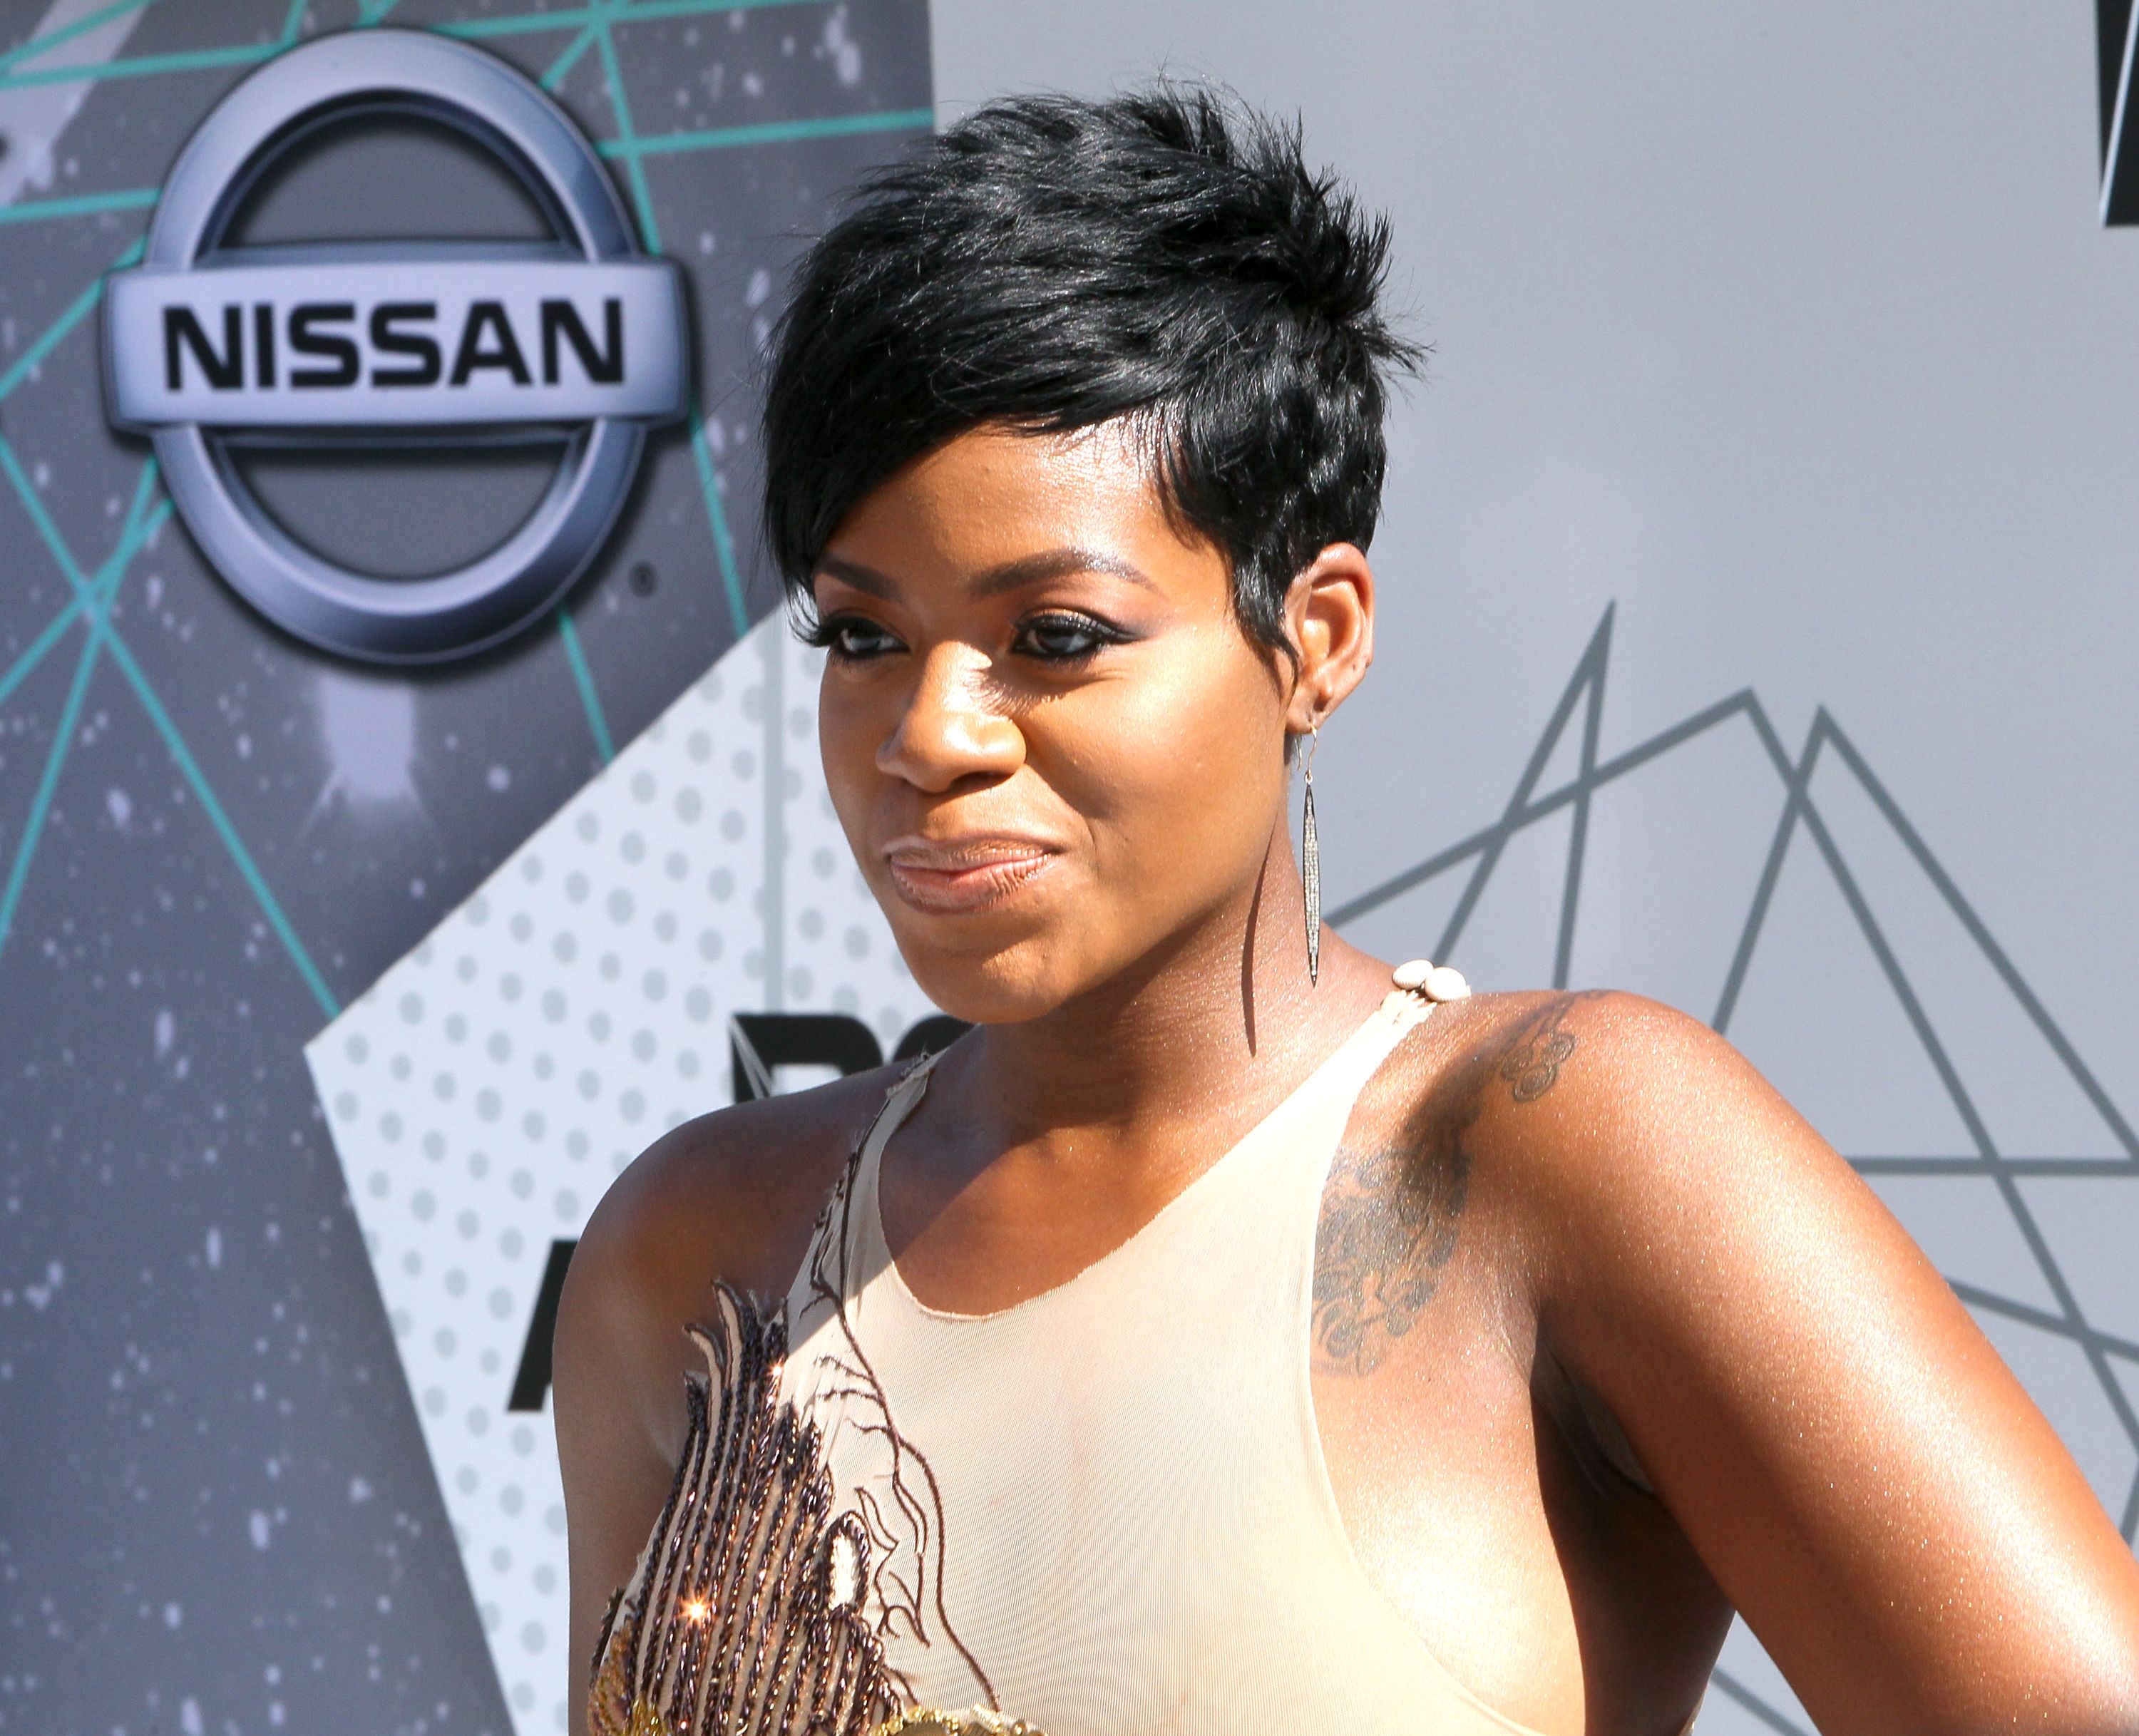 Singer Fantasia Barrino attends the 2016 BET Awards at Microsoft Theater on June 26, 2016 | Photo: Getty Images